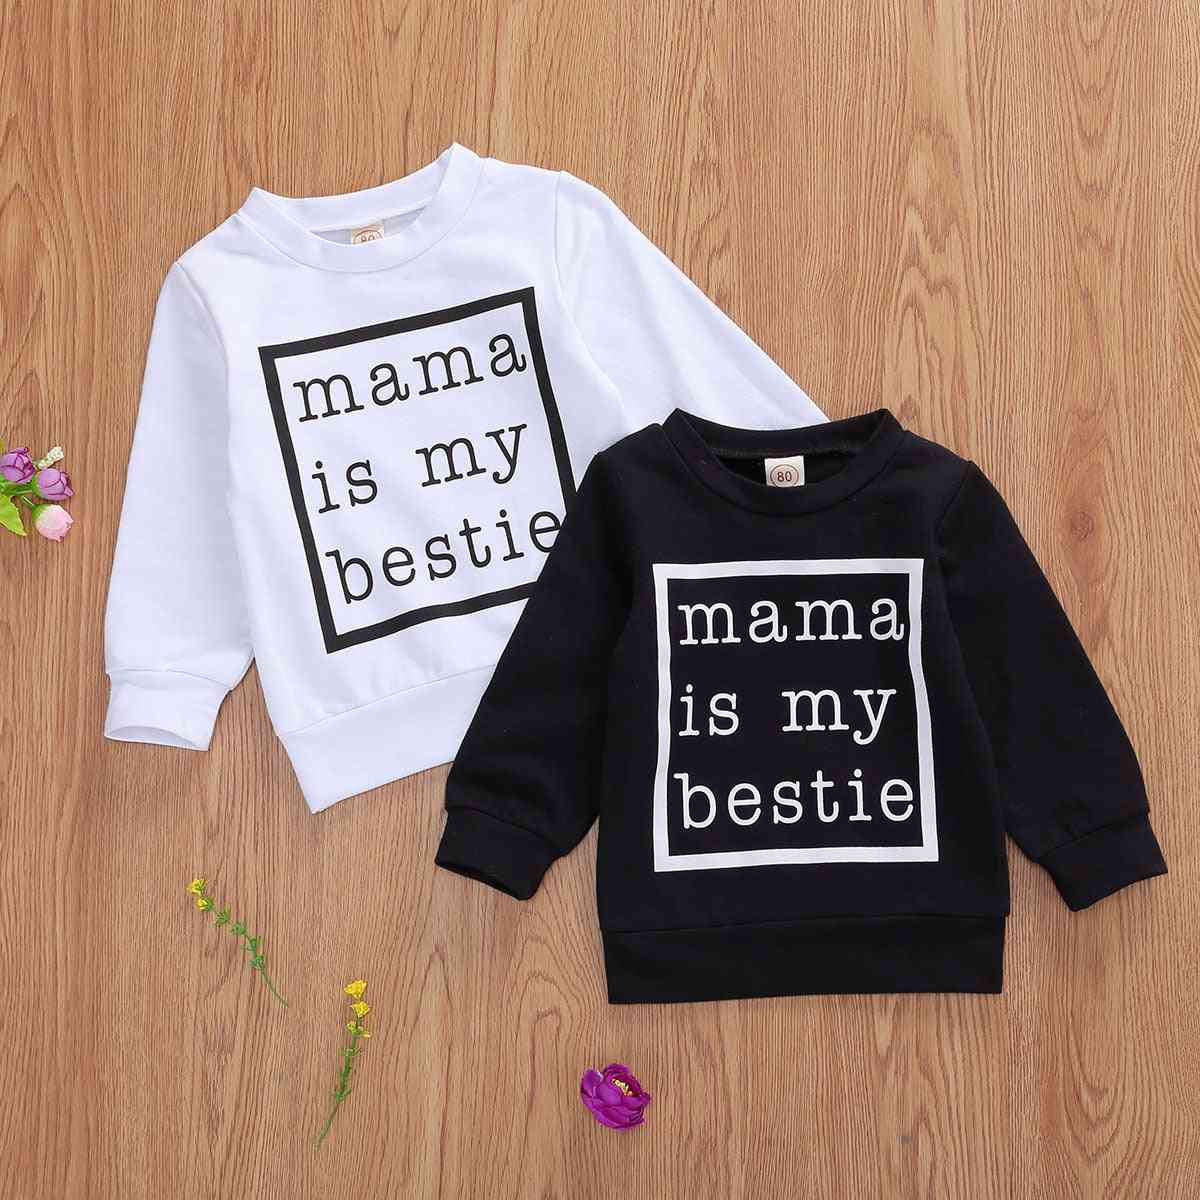 Winter Warm- Letter Print, Long Sleeve & O-neck, Tops Sweatshirts For,